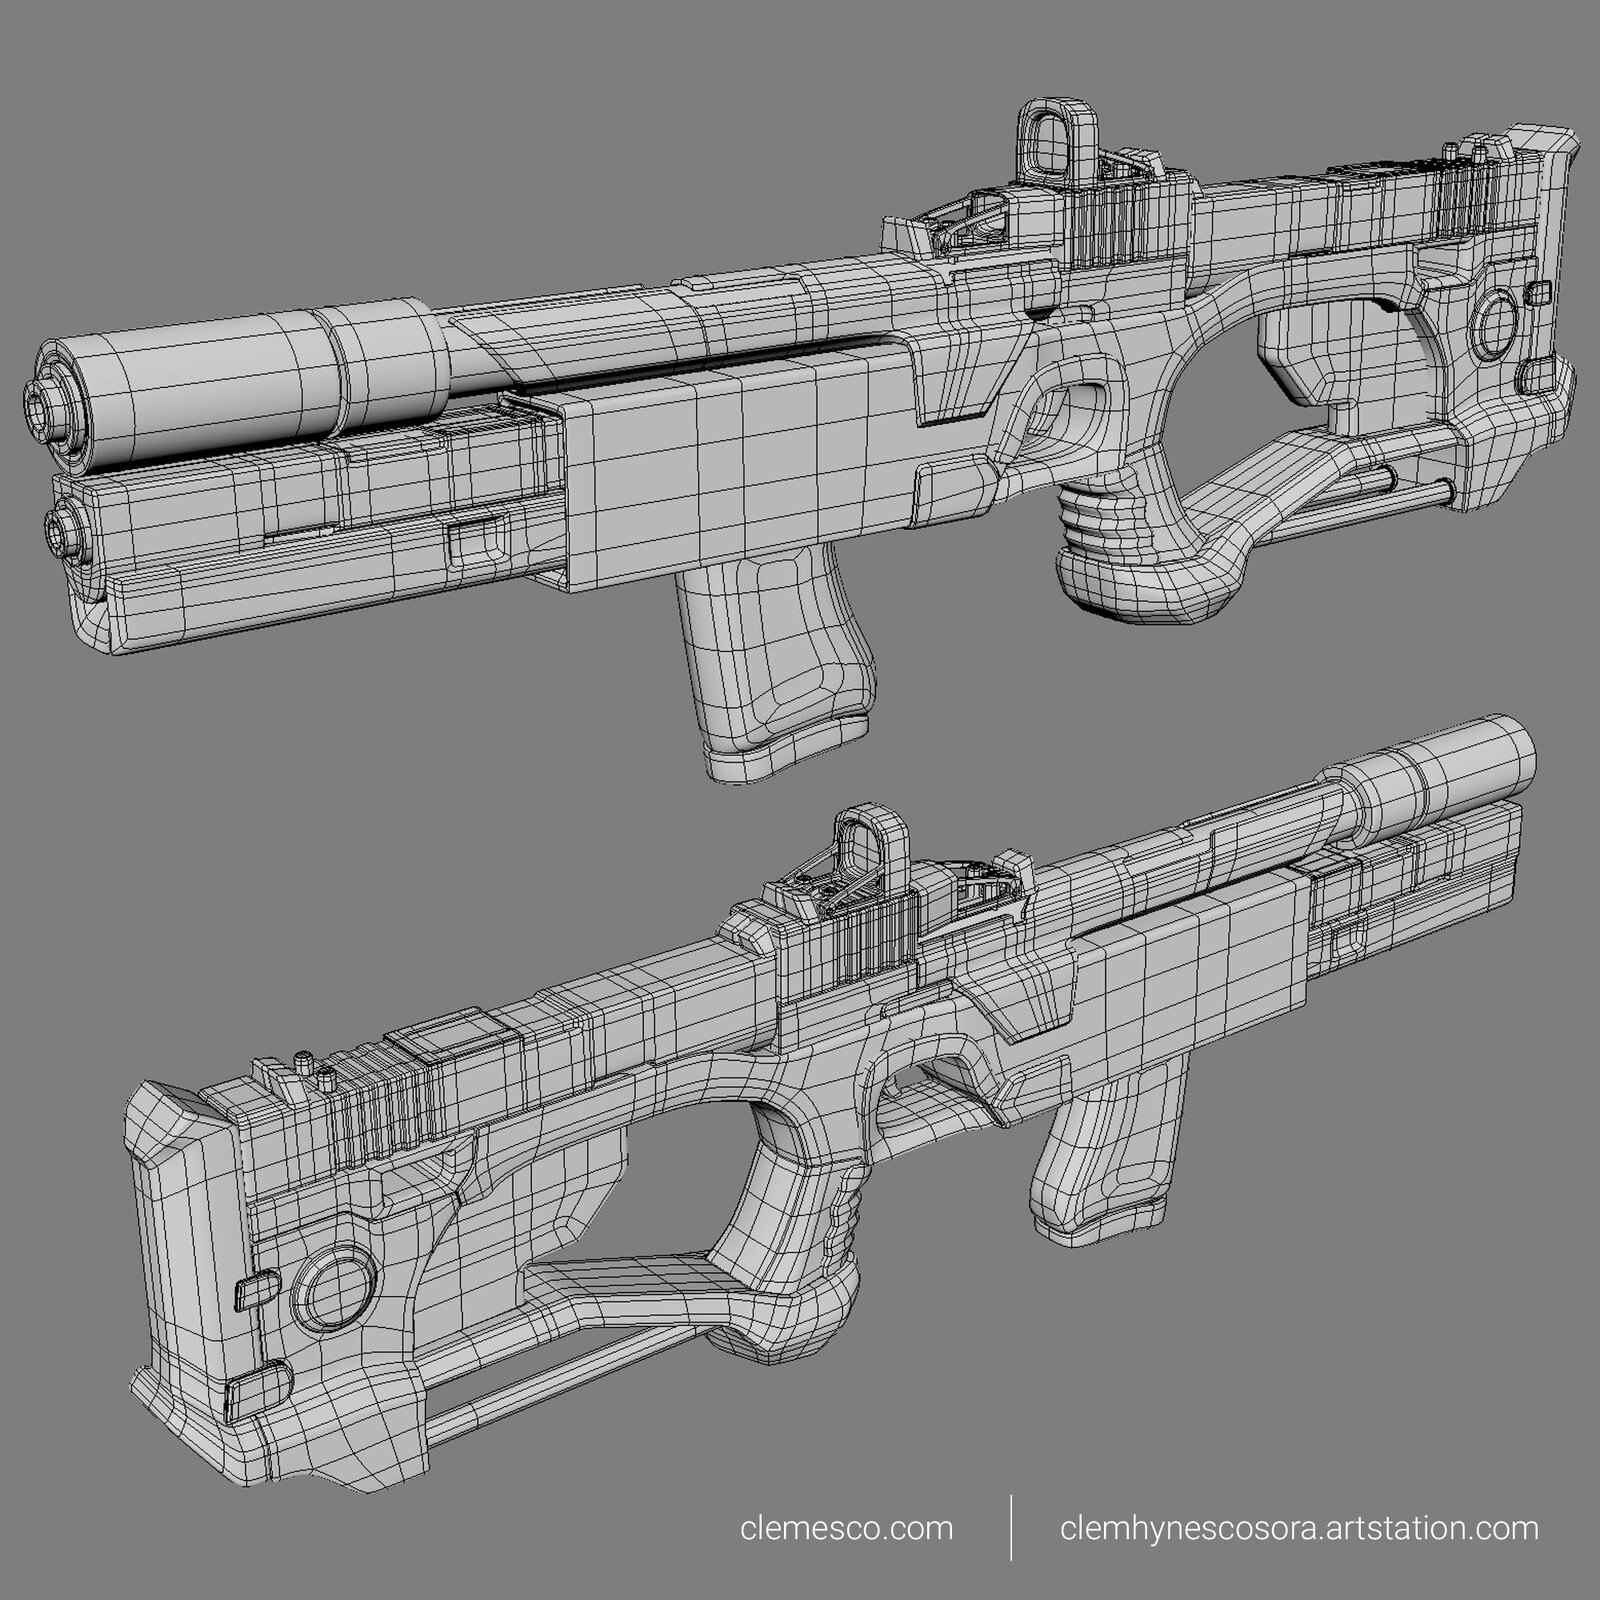 android squad weapon. ascifi gun sniper . 3d cg weapon for my upcoming short film. modeled in maya, textured in substance painter and rendered by arnold.